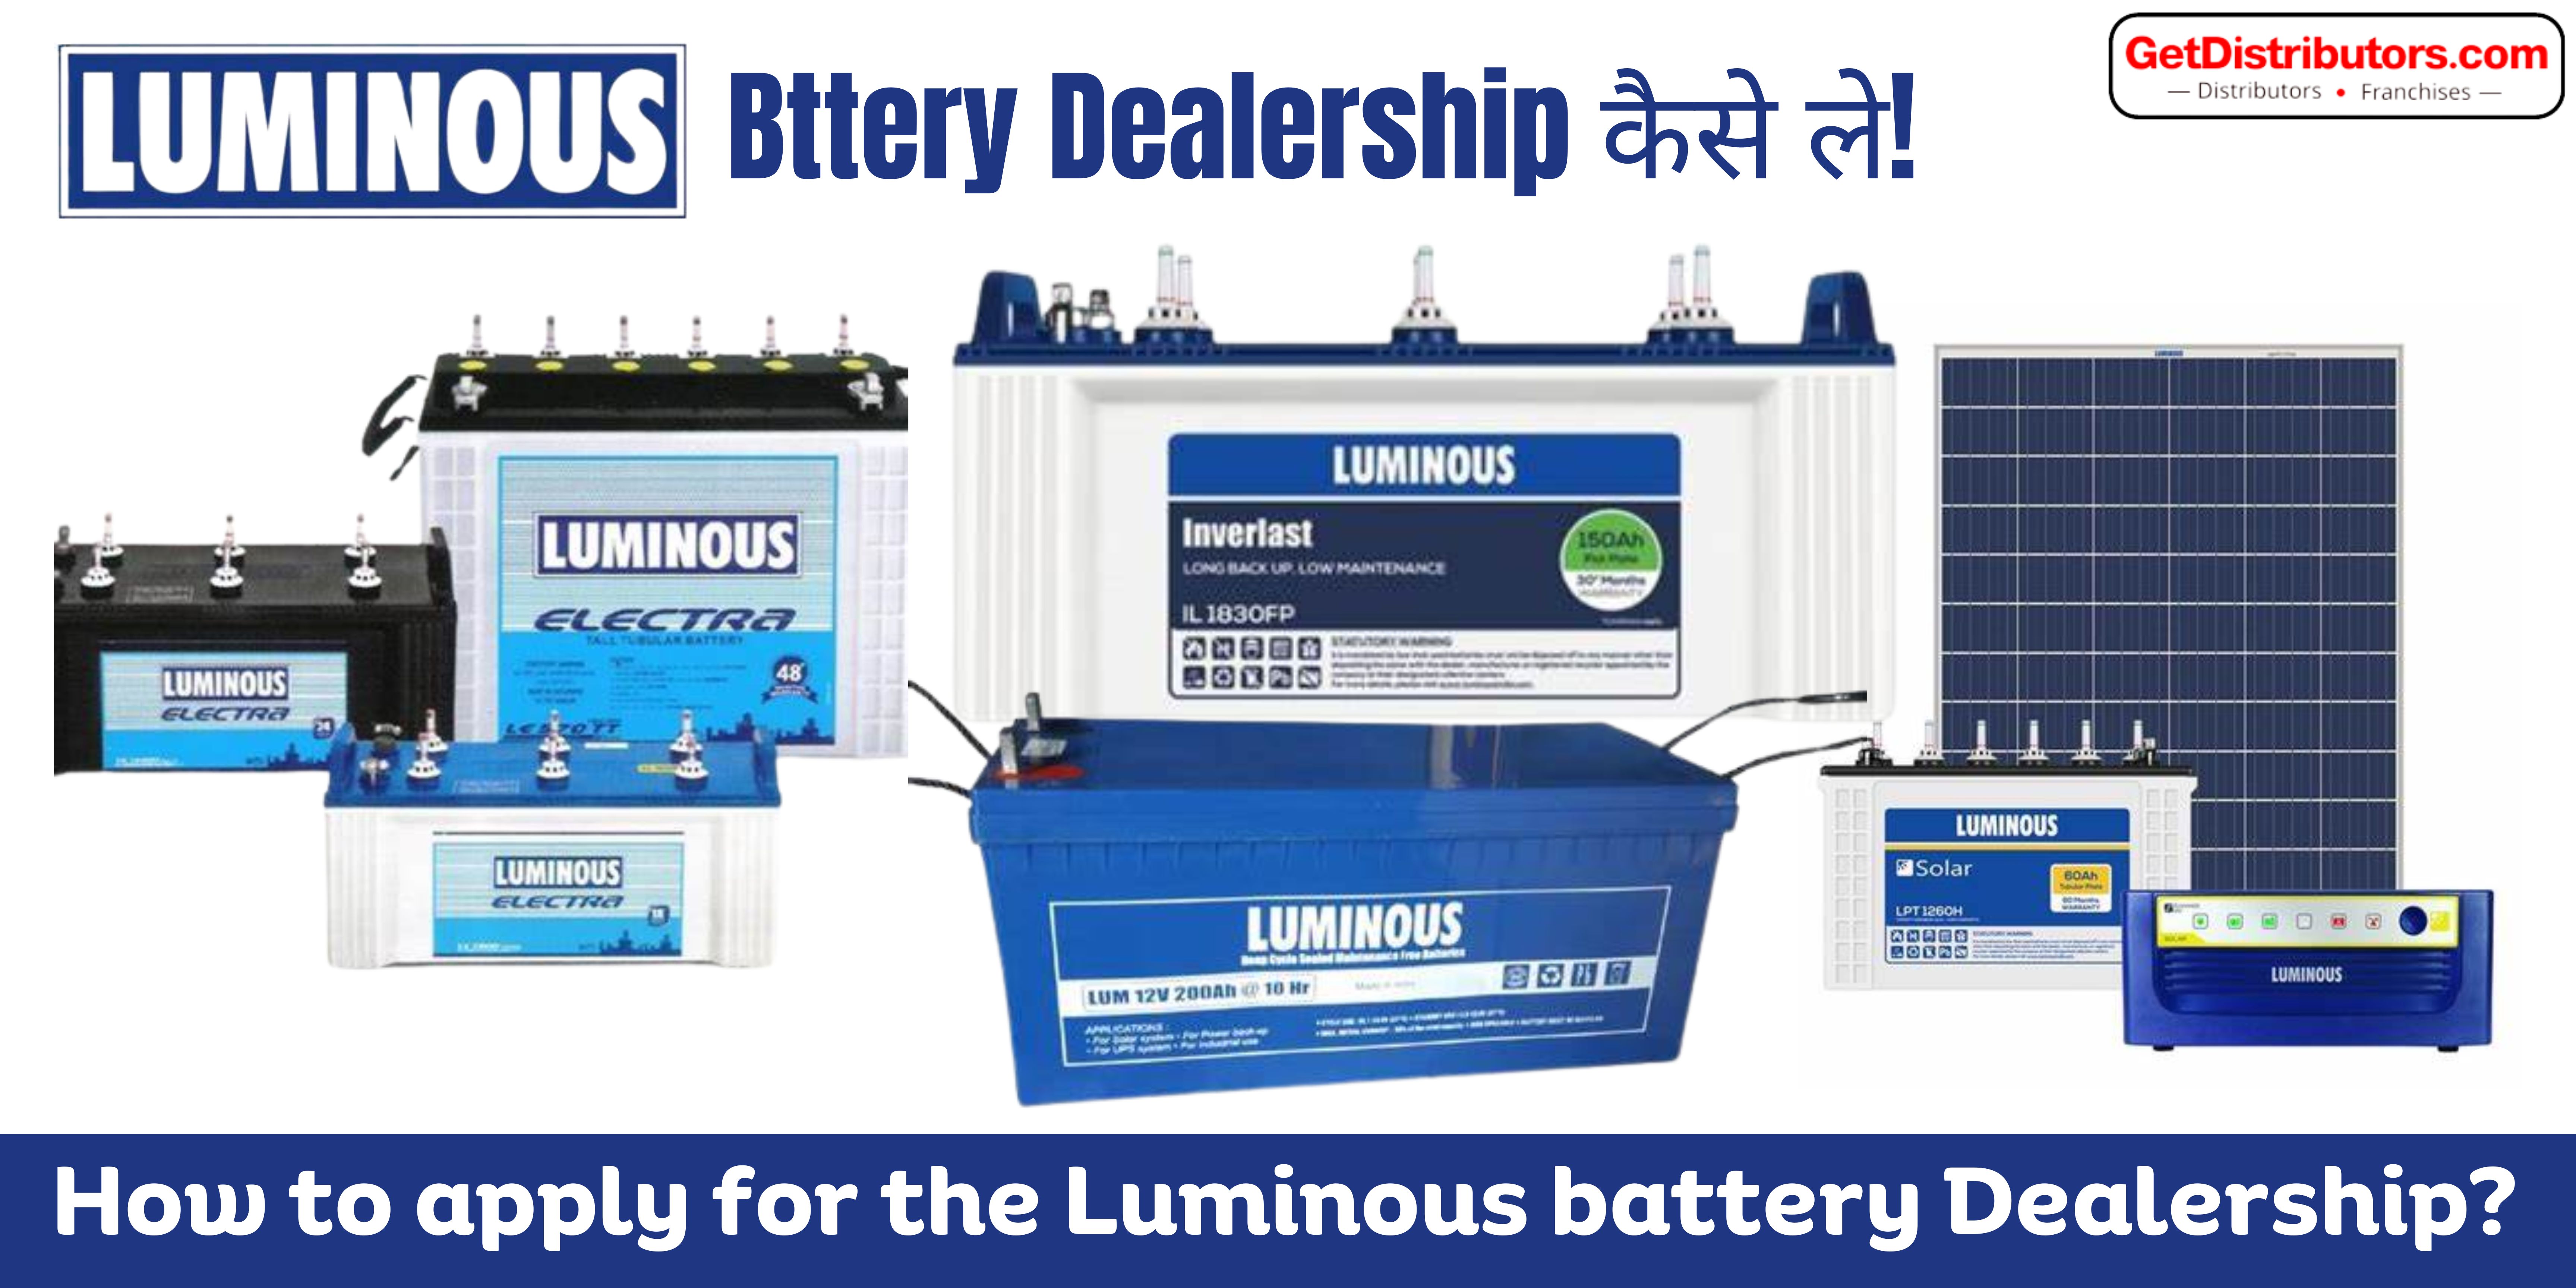 How to apply for the Luminous battery Dealership